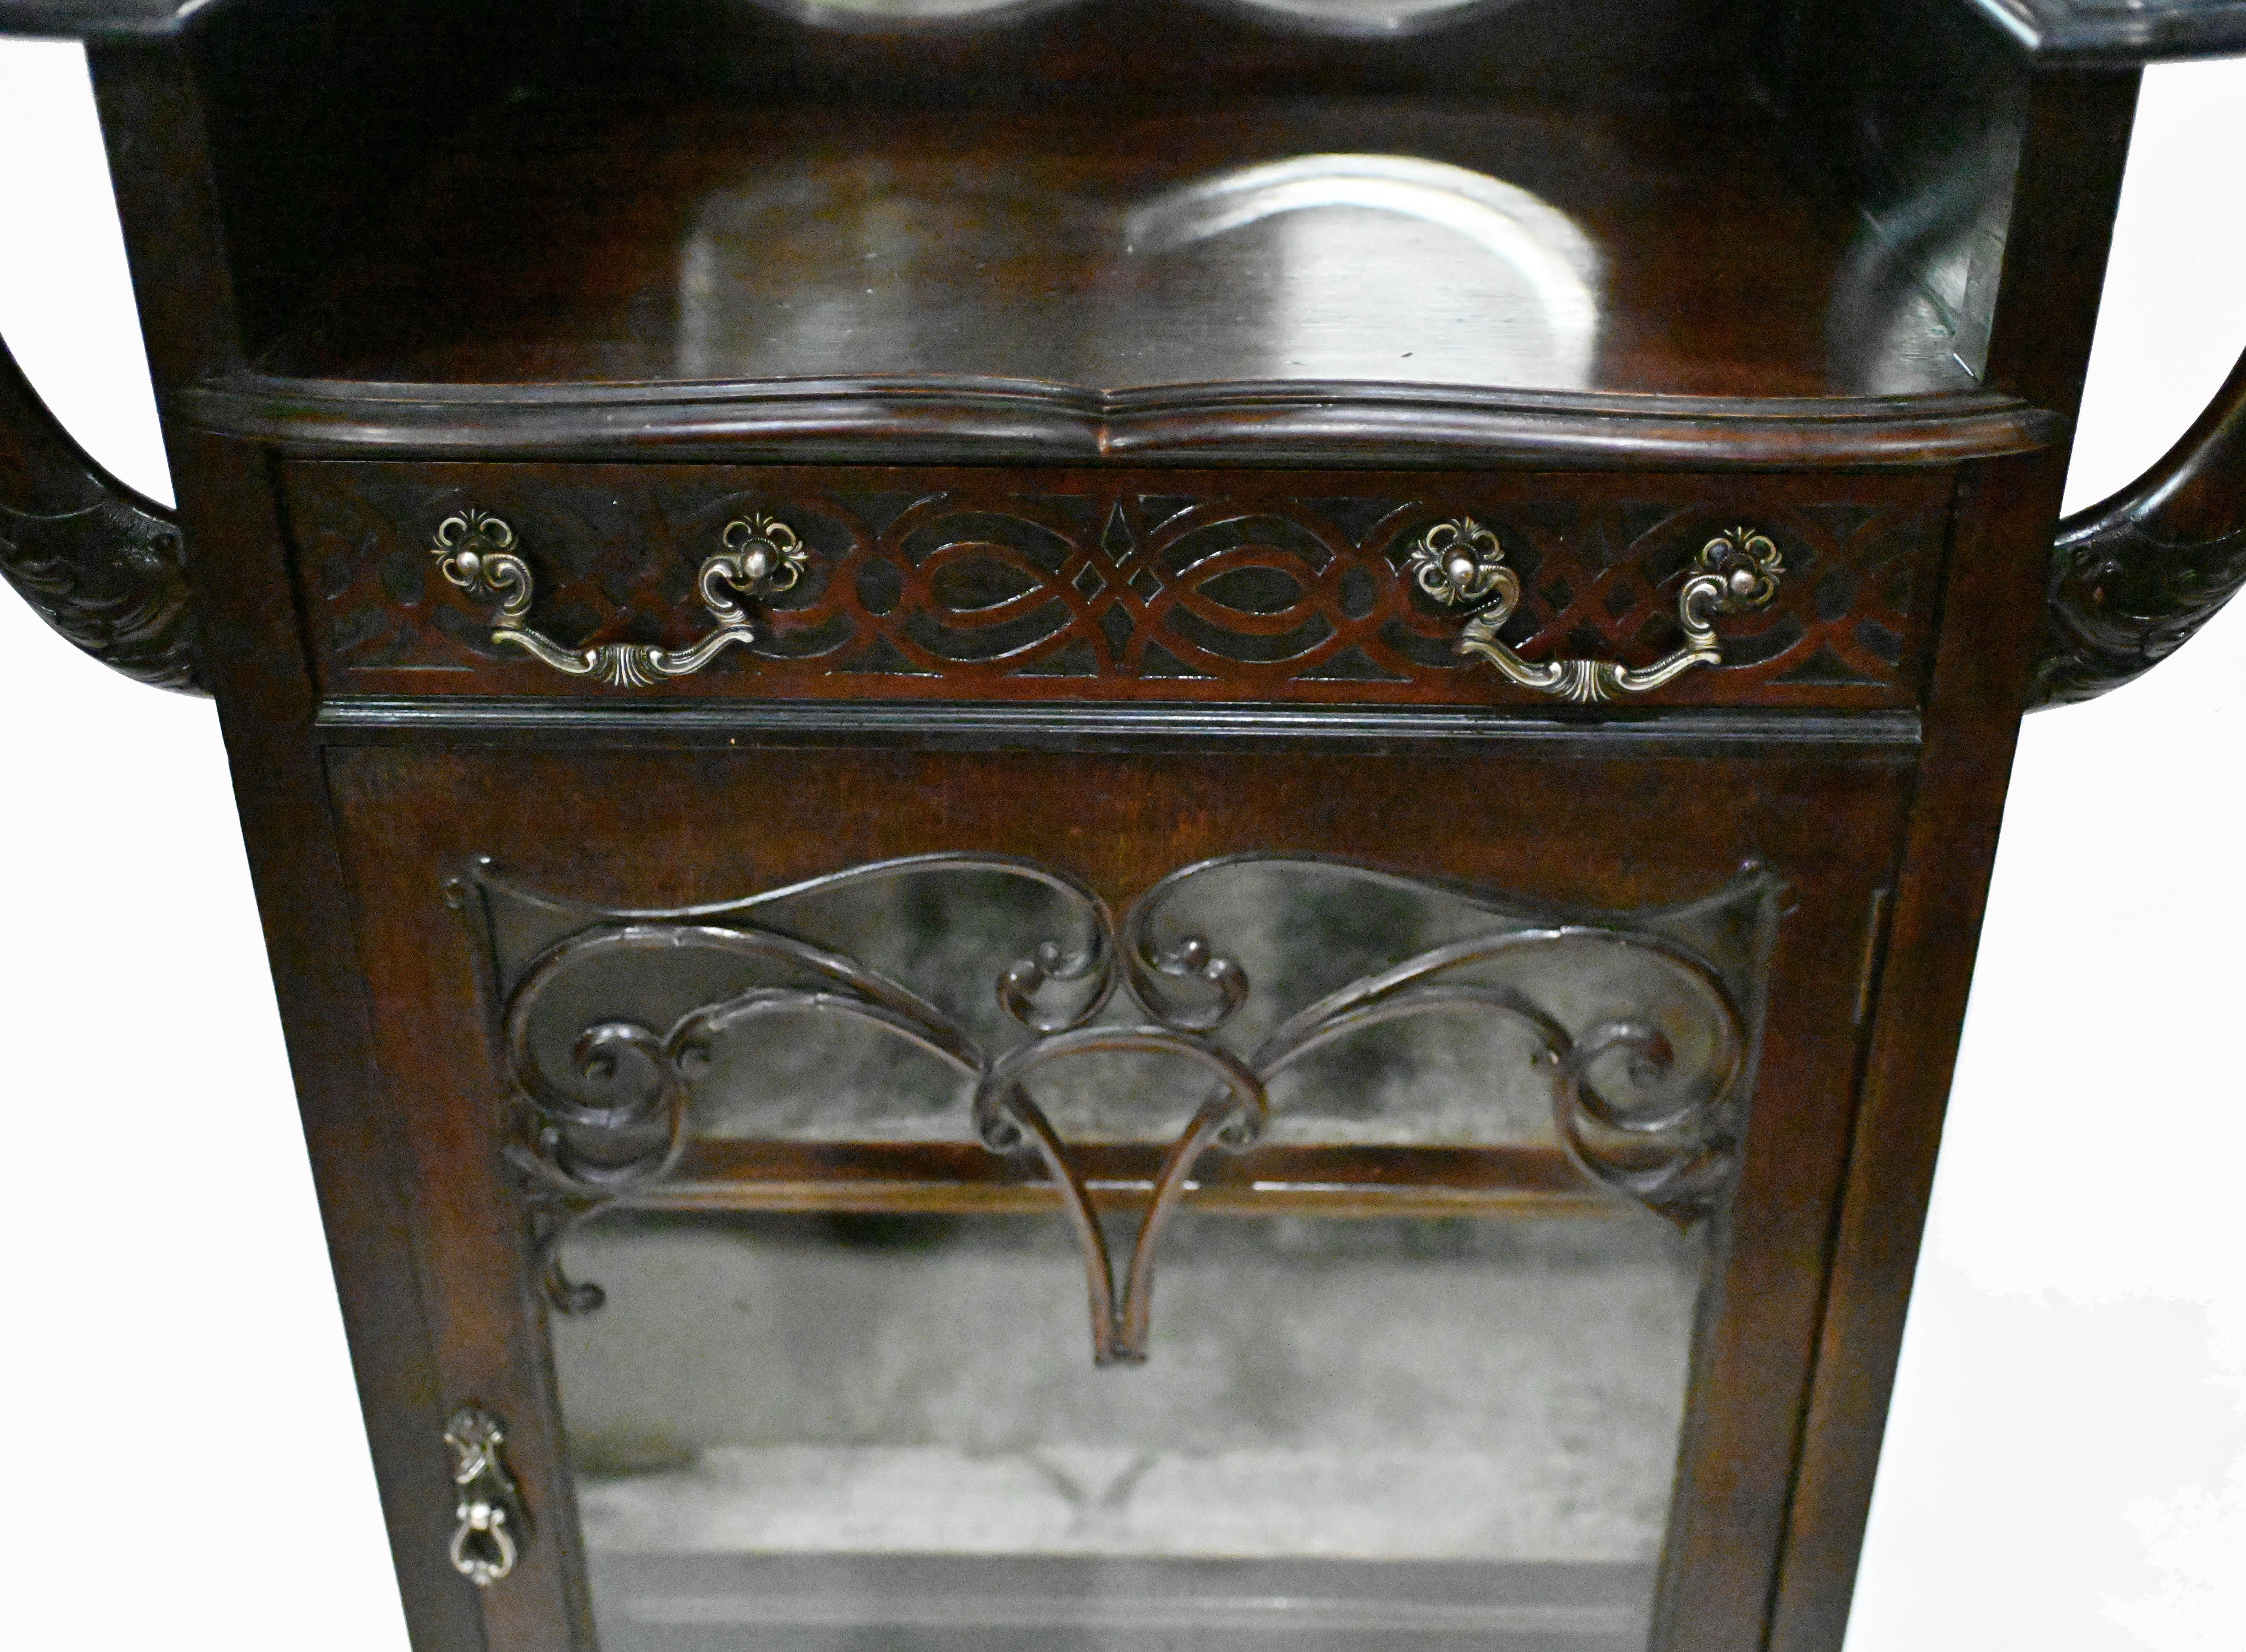 You are viewing a stylish art nouveau display or drinks cocktail cabinet
Very ornate piece, especially the floral motifs on the back piece
Drawer features intricate fret works also and the drink serving area has a mirror behind it
We date this